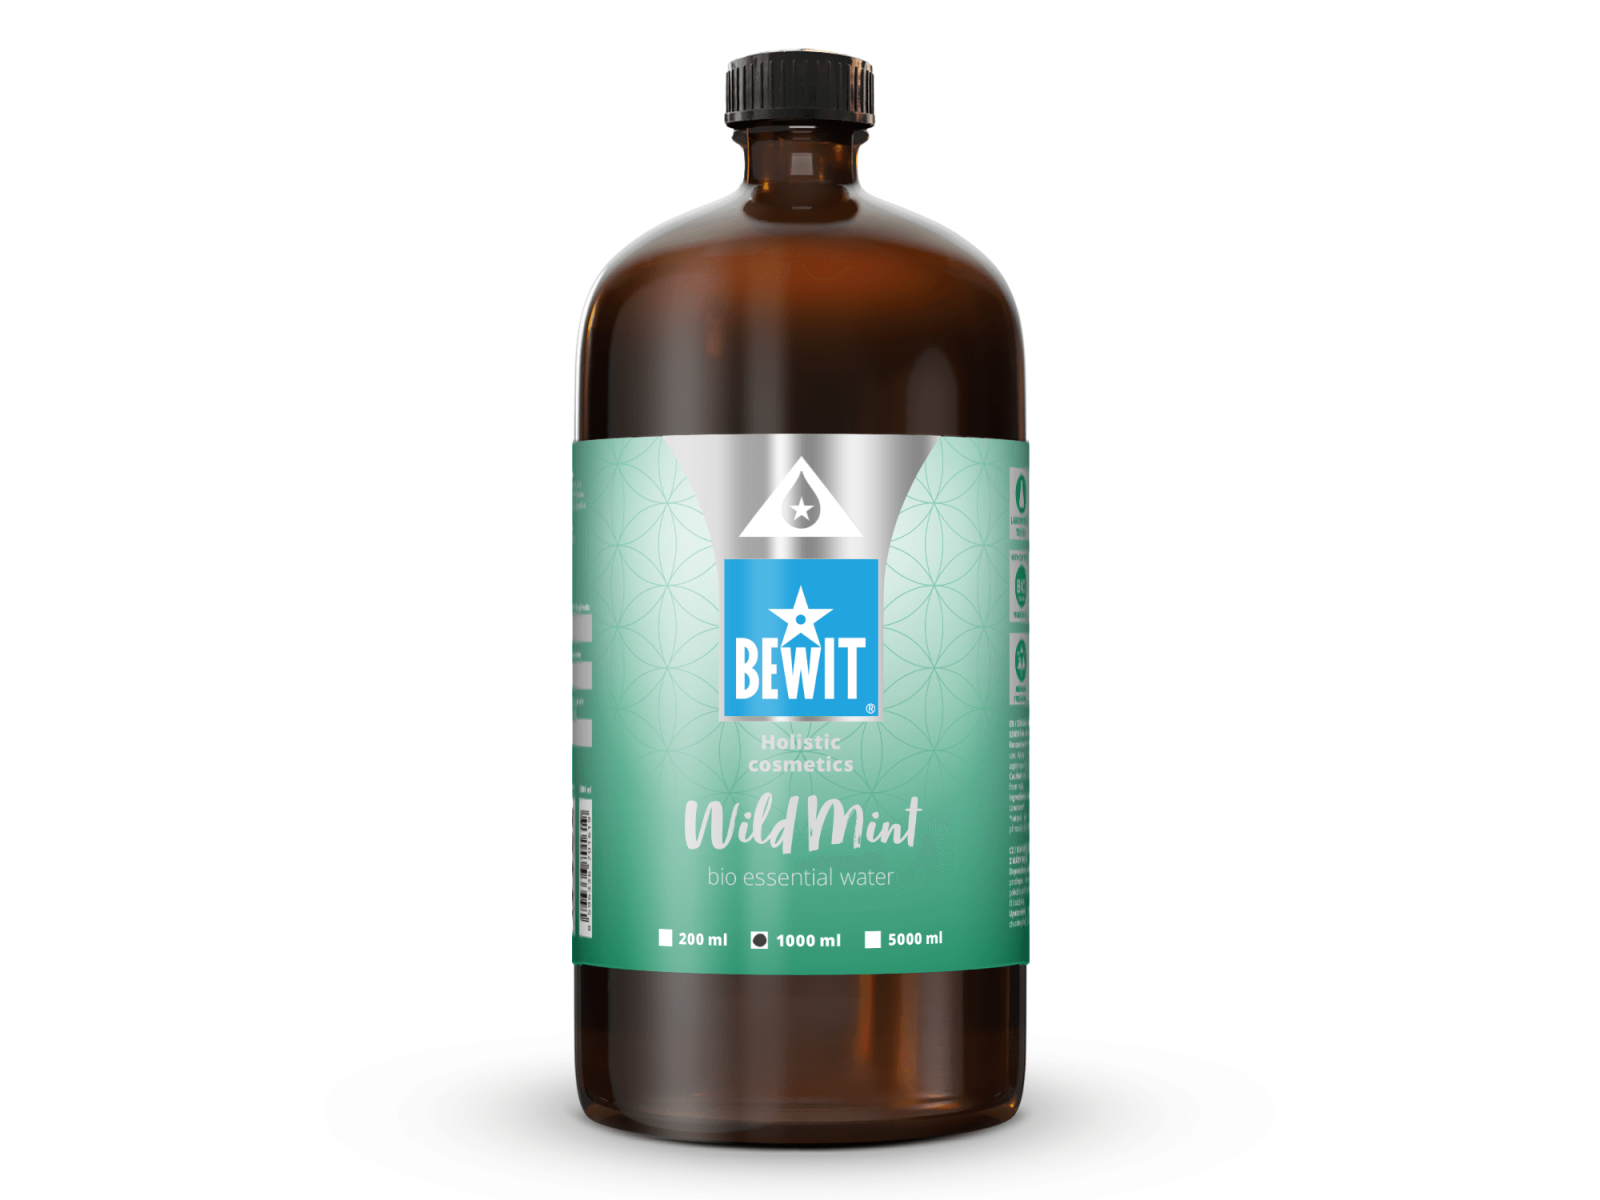 BEWIT Organic mint essential water - 100% NATURAL HYDROLYTE - 4